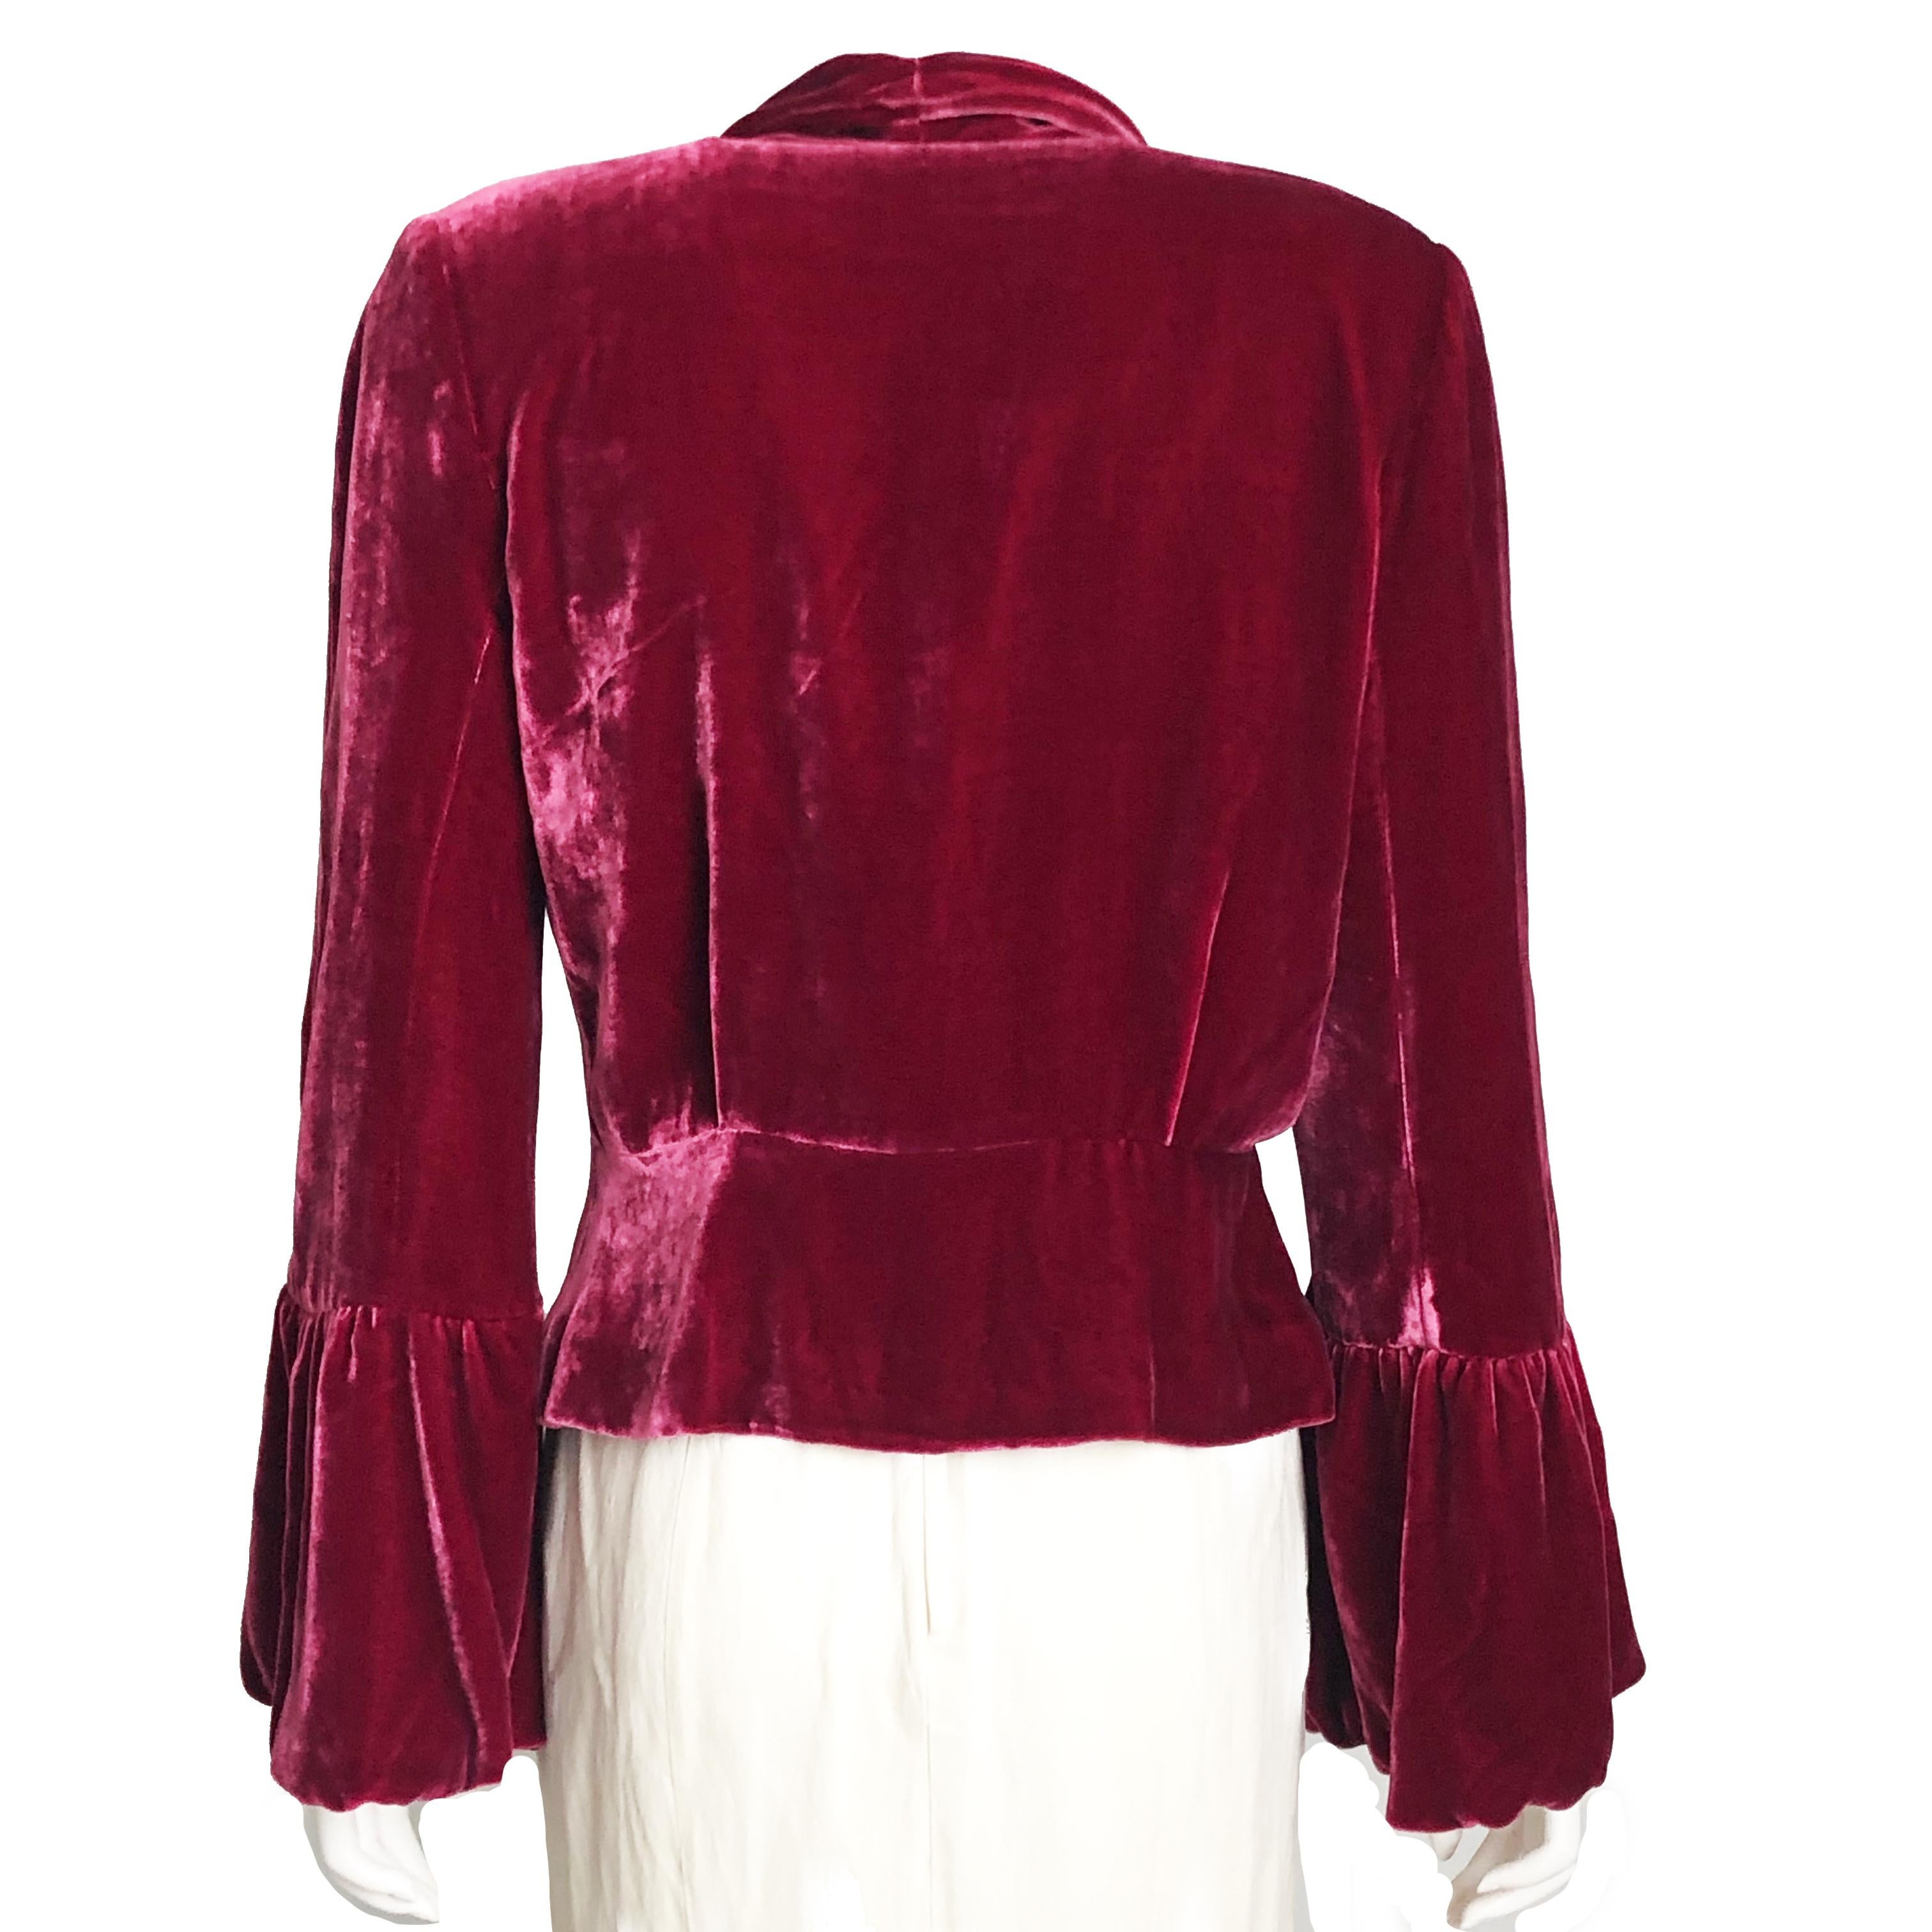 Chic John Galliano Silk Velvet Jacket with peplum hem and bell sleeves, size 10. Made from a silk blend velvet in a rich cranberry red (dark pink hued tone), it's fully lined in matching silk. Dry clean only. Preowned with some signs of prior use &